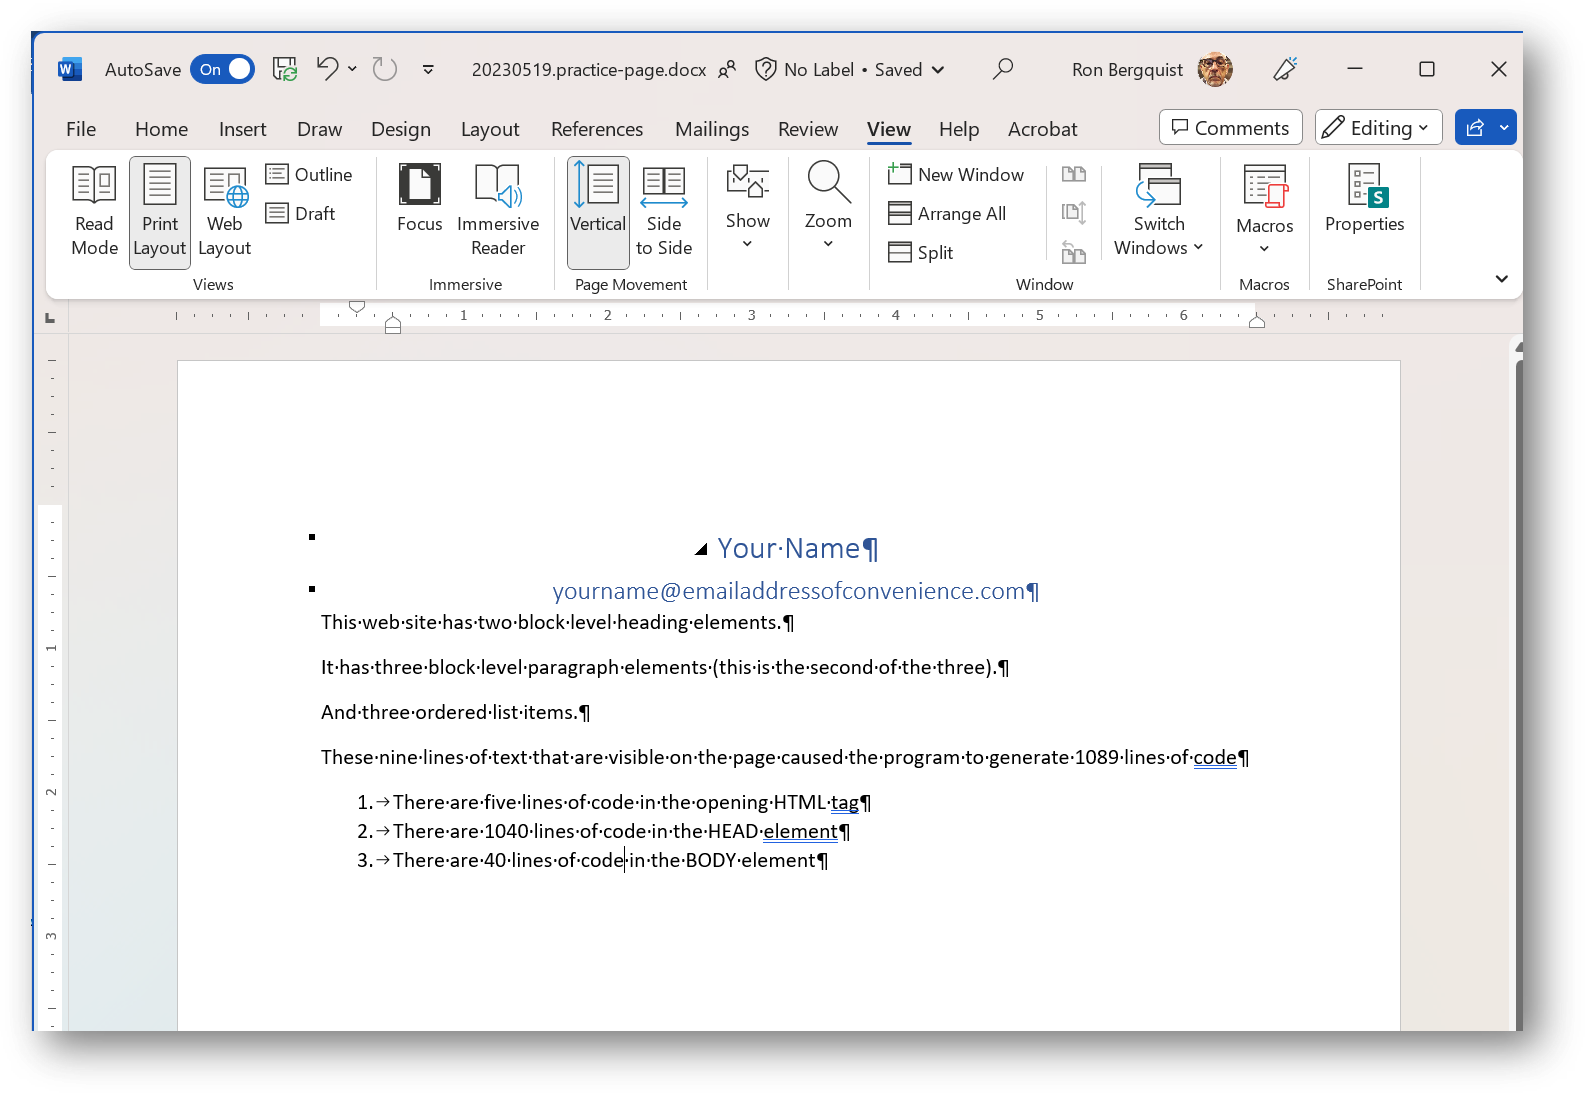 an image of what the practice page looks like in MSWord